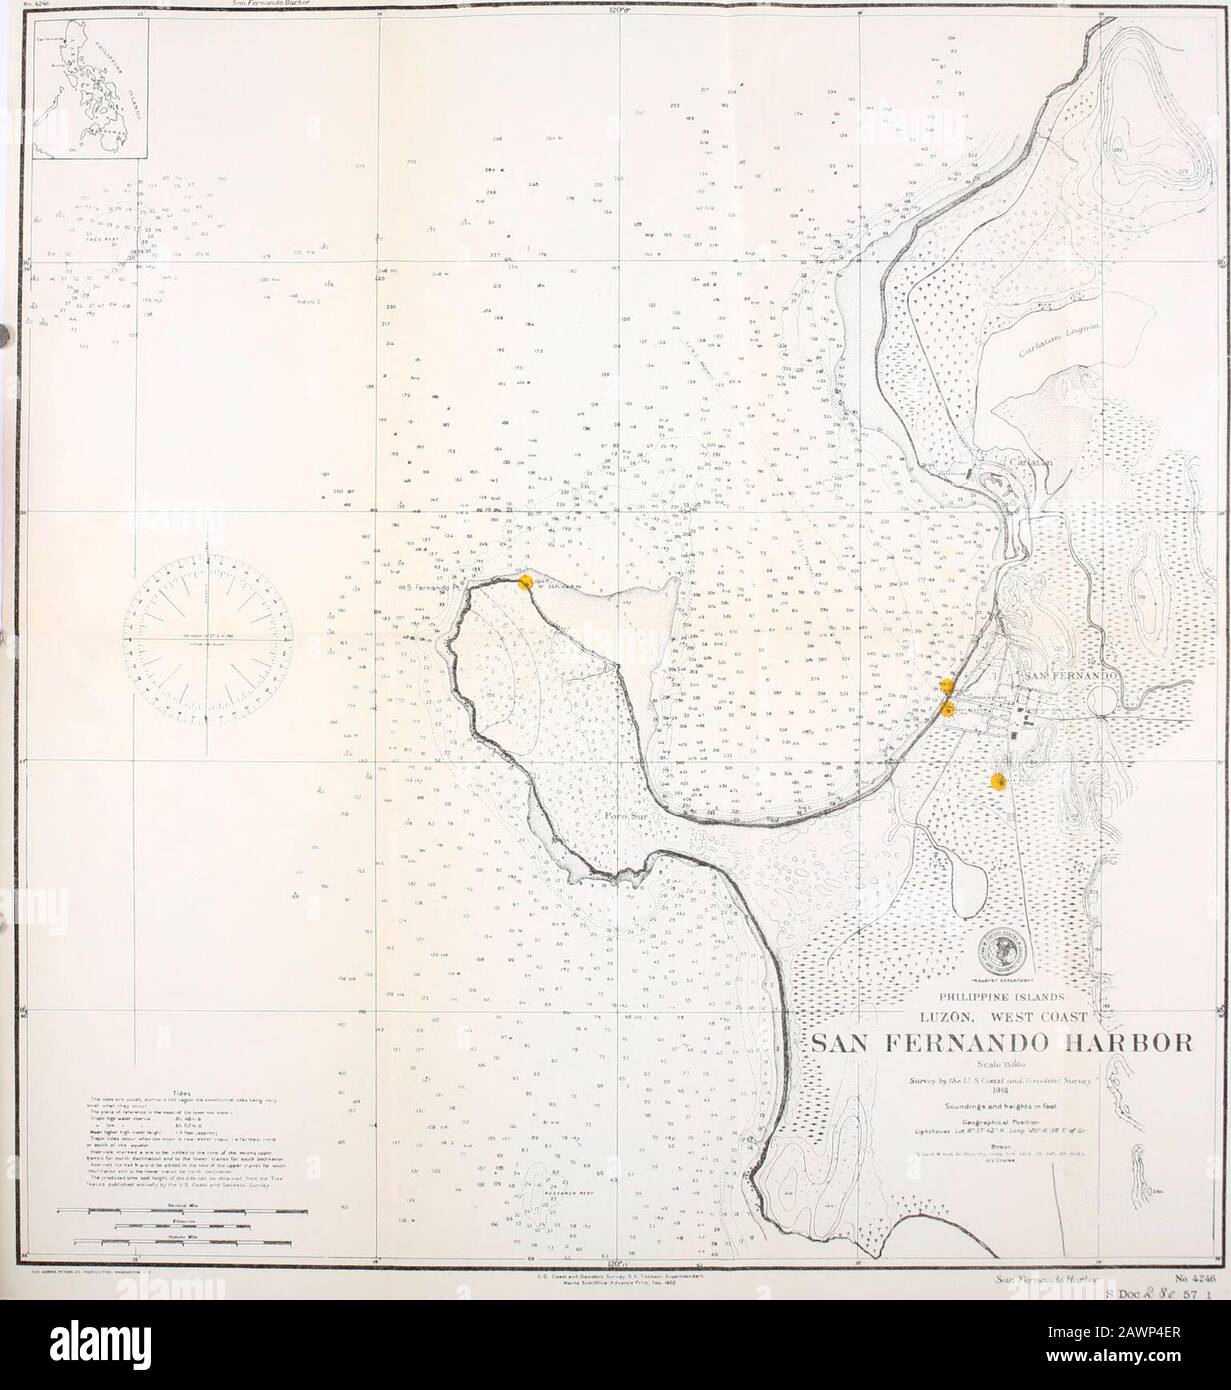 A pronouncing gazetteer and geographical dictionary of the Philippine Islands, United States of America with maps, charts and illustrations . ne and a continuation of the Cordillera Central form the E. boundary,the highest summit being Mt. Biumaca, 19 m. E. by N. of San Fernando and INIt.Santo Tomas, 7,418 ft. high, E. of Agoo. From these heights the AV. side dropssuddenly to plains along the coast not more than 10 to 15 m. distant. All the riversexcept one passing Naguilian and 2 others in the S., have their rise on the AY. water-shed and empty into the China Sea. BAYS AND HARBORS. About 20 m Stock Photo